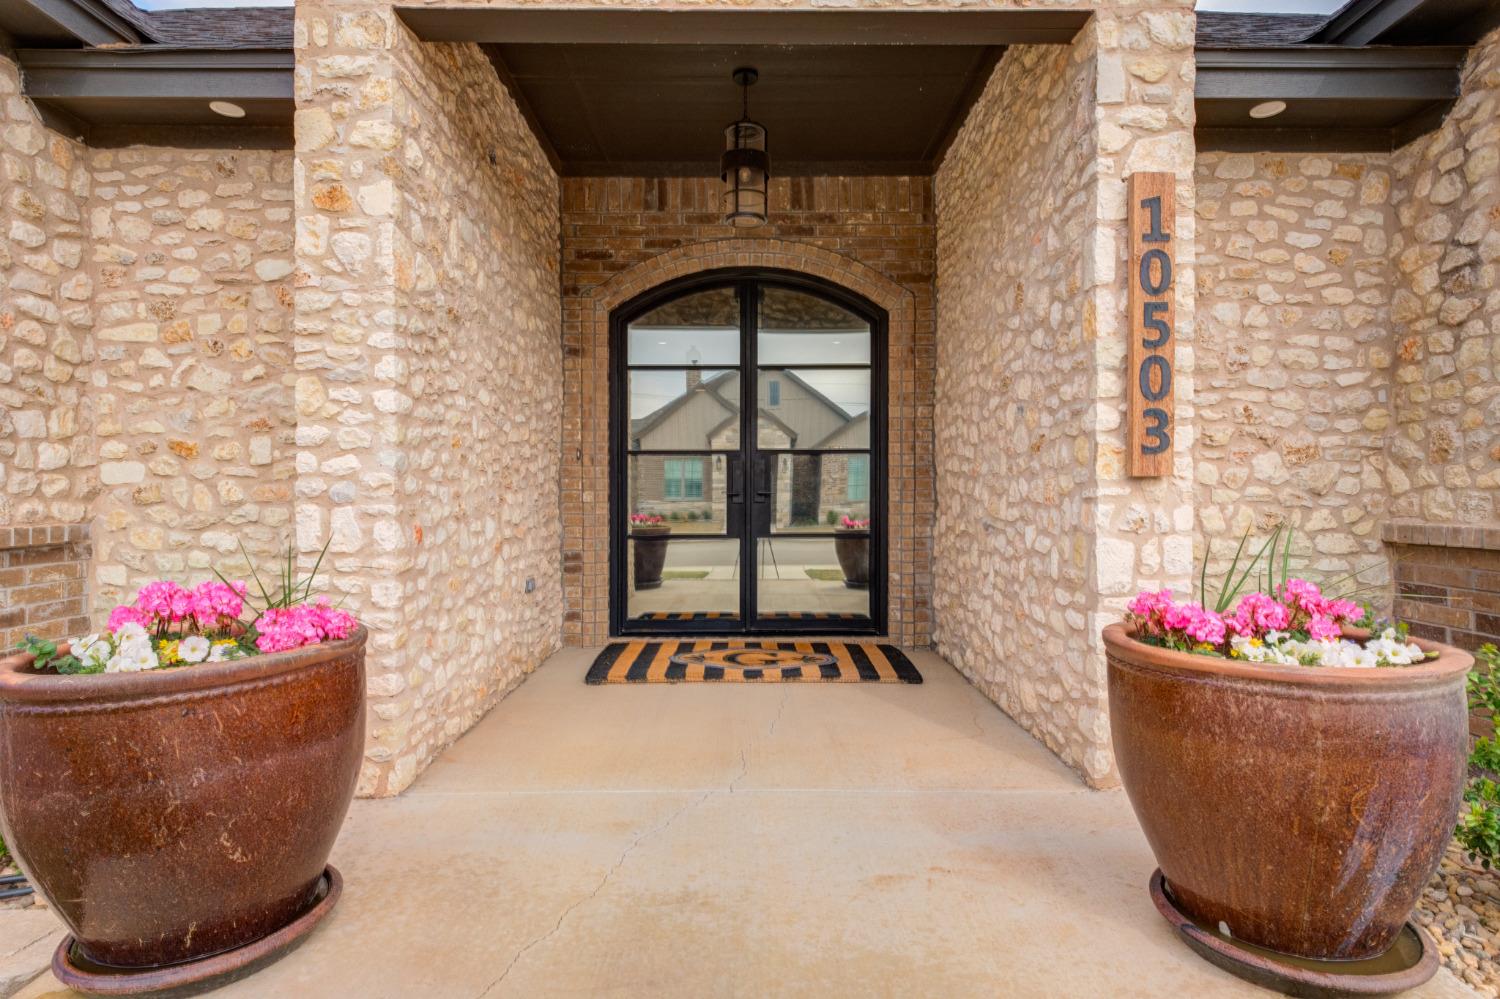 From the moment you drive up you'll fall in love with the exterior stone entryway double iron-paned glass front door! As you step into this fabulous Custom Garden Home you'll feel both at home & in awe of the amazing craftsmanship & designer finishes right out of a magazine. You'll see all the entertaining possibilities this pristine beauty offers. The open floor plan will allow for fluid transitions as your events transpire & open to an inviting courtyard w/hot tub; a perfect place to relax w/family & friends. This home boasts luxurious features 3/3/2, formal dining, wine & coffee nook, huge walk-in pantry, gourmet kitchen lots of custom cabinets, breakfast bar, SS  fridge/freezer, 5 burner gas cook top, granite countertops in kitchen, tile (wood look) flooring, spa inspired master suite w/huge walk-in closet. Spacious utility! Spray foam insulation! Water Softener! Mud Room! Floored Attic Storage! Exceptional curb appeal with lush landscaping nestled on an impressive cul-de-sac.